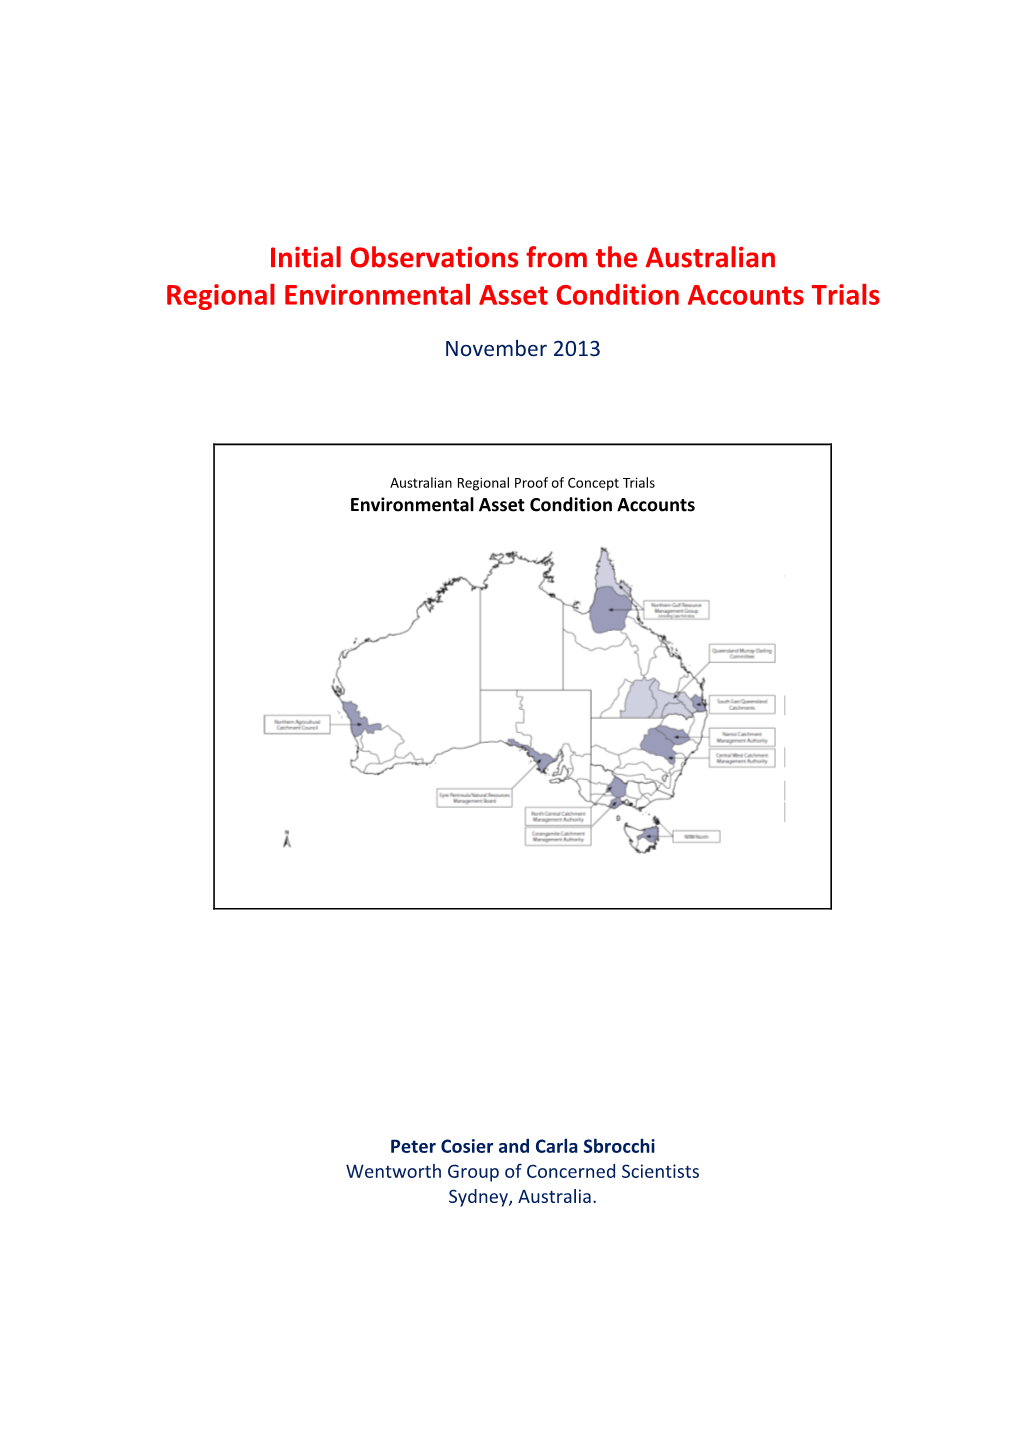 Initial Observations from the Australian Regional Environmental Asset Condition Accounts Trials